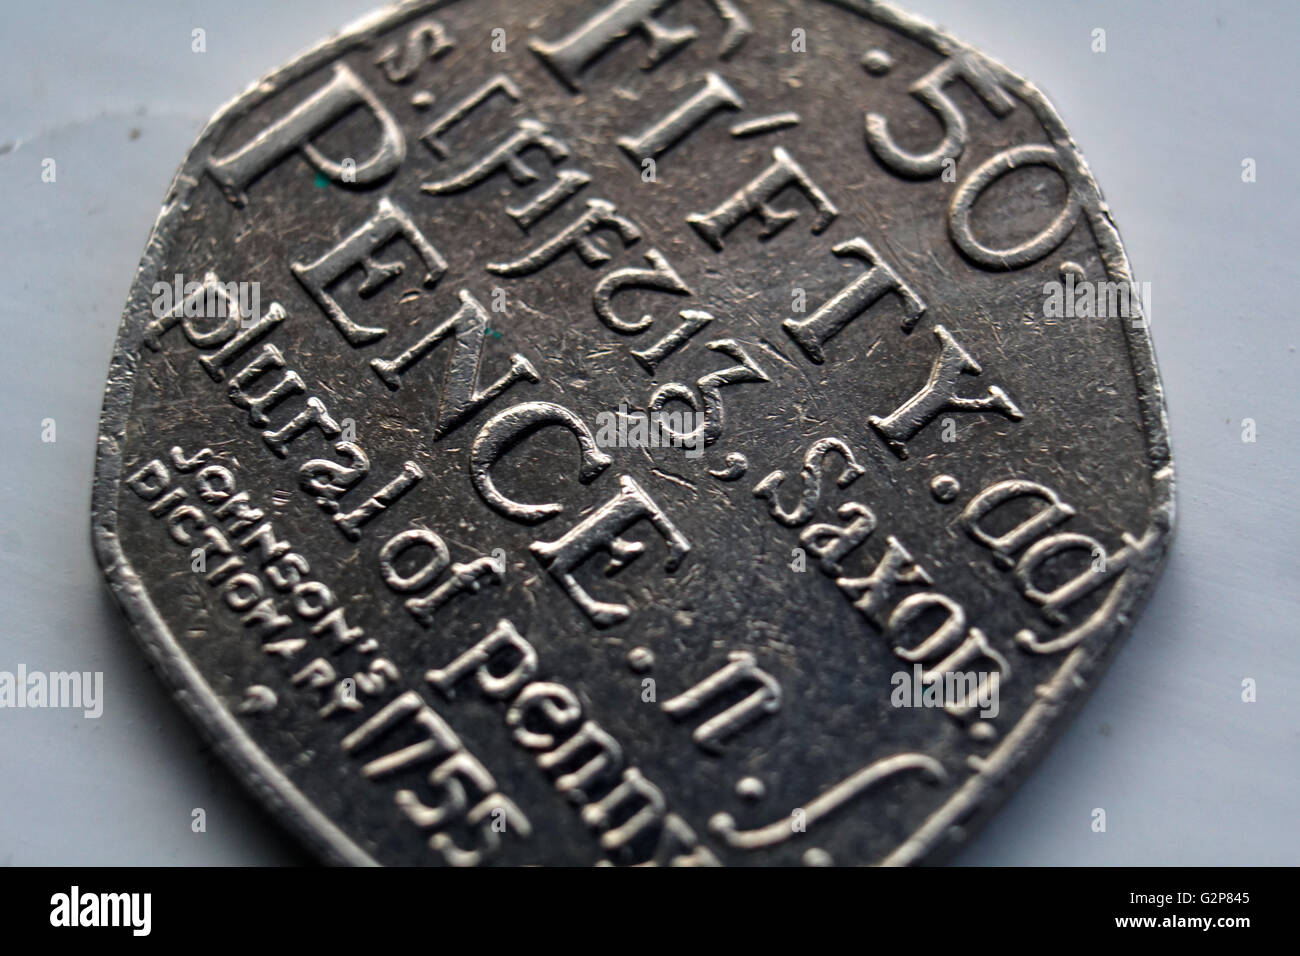 50 Pence Coin Close-Up Stock Photo